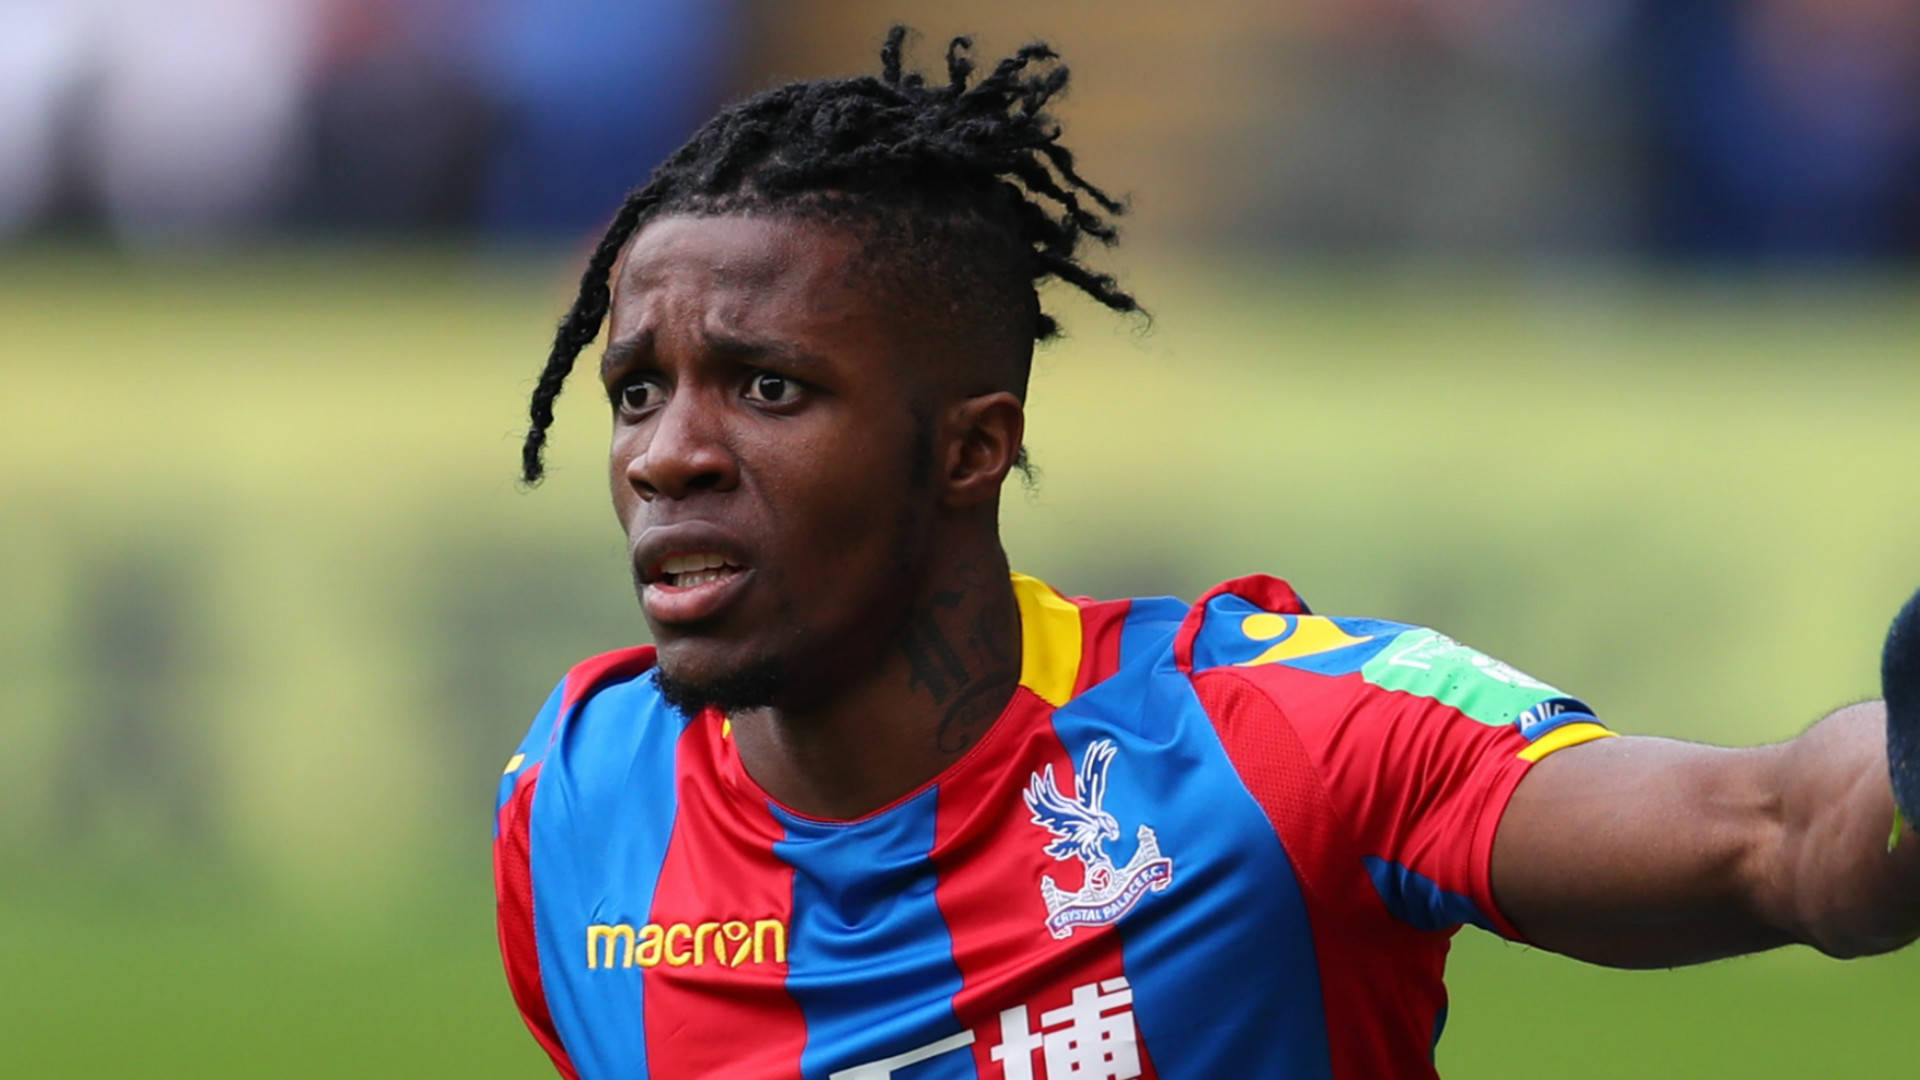 Wilfried Zaha With Hair Tied Up Wallpaper